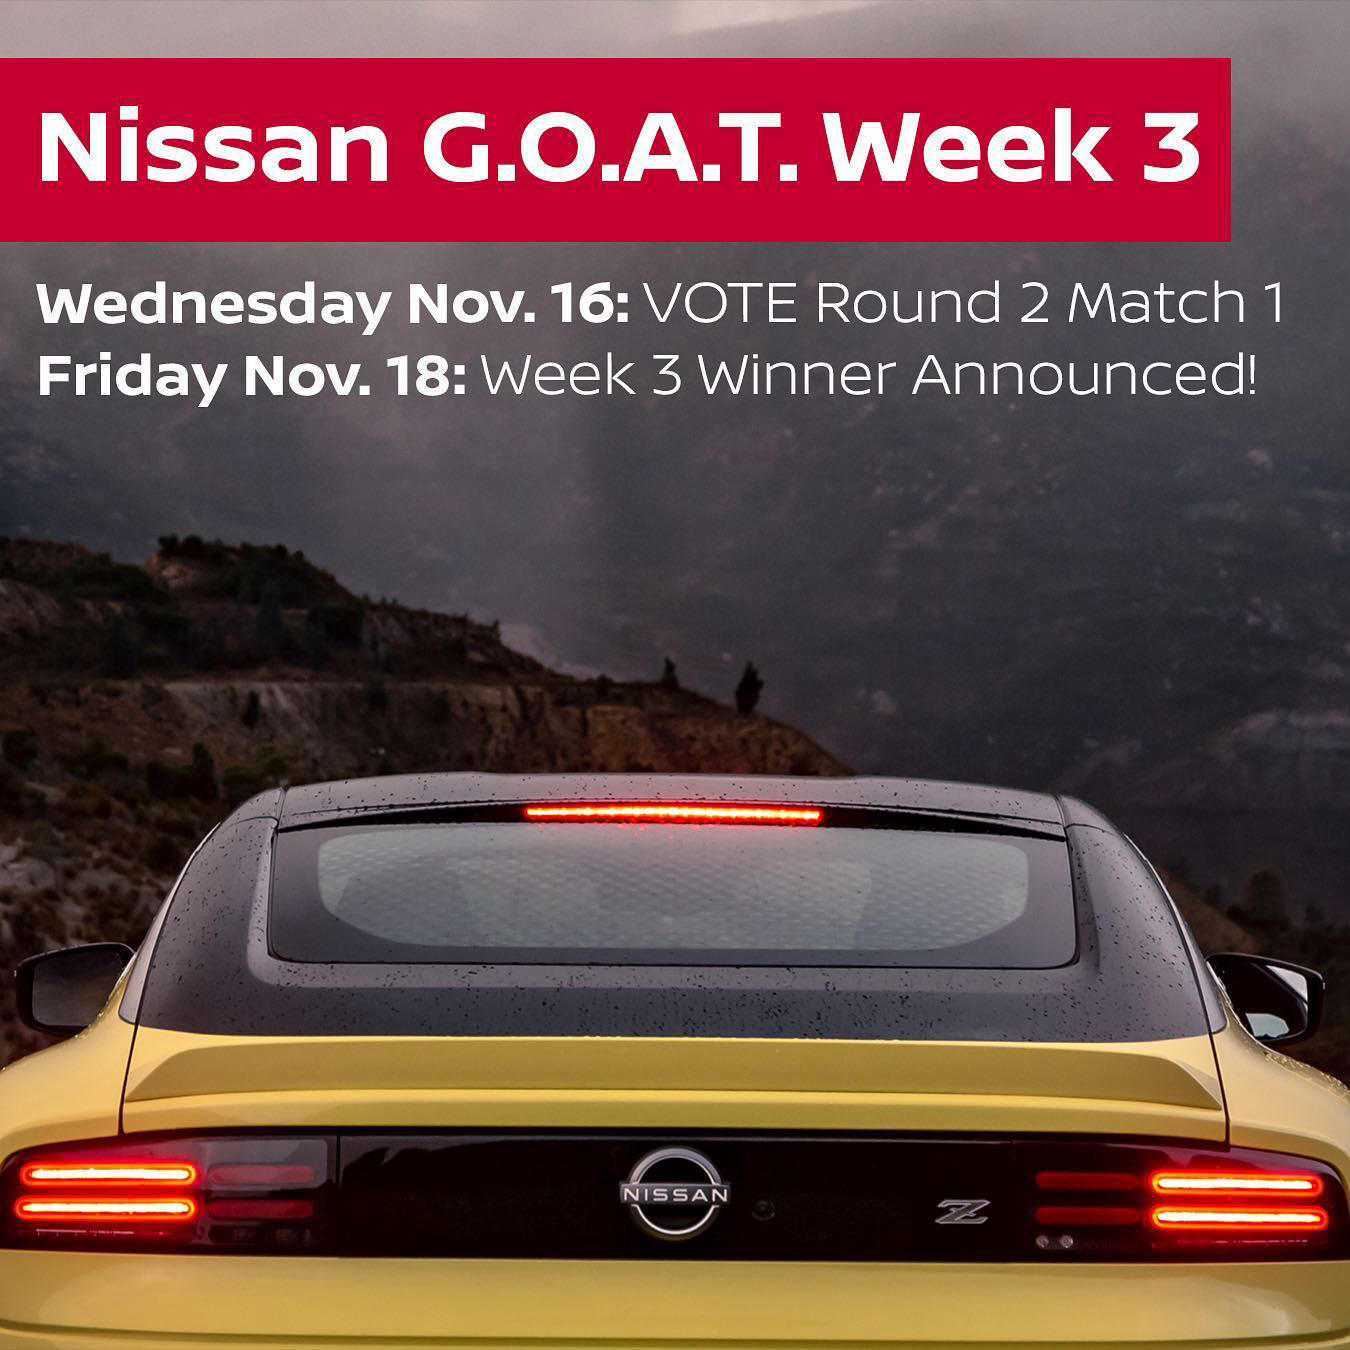 Nissan - Welcome to Week 3 of the Nissan G